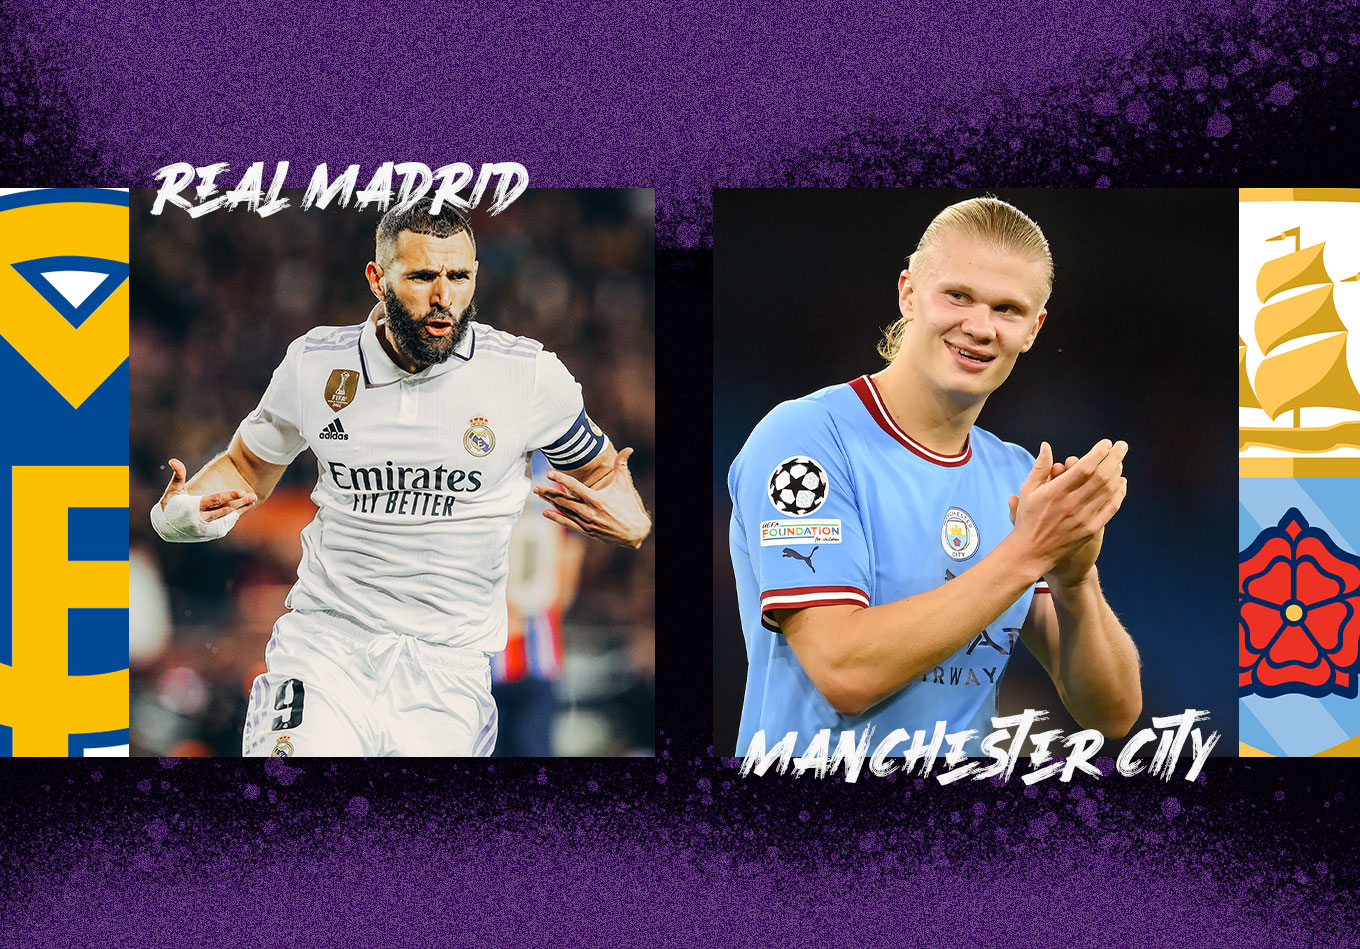 Real Madrid vs Manchester City: Prediction and Preview